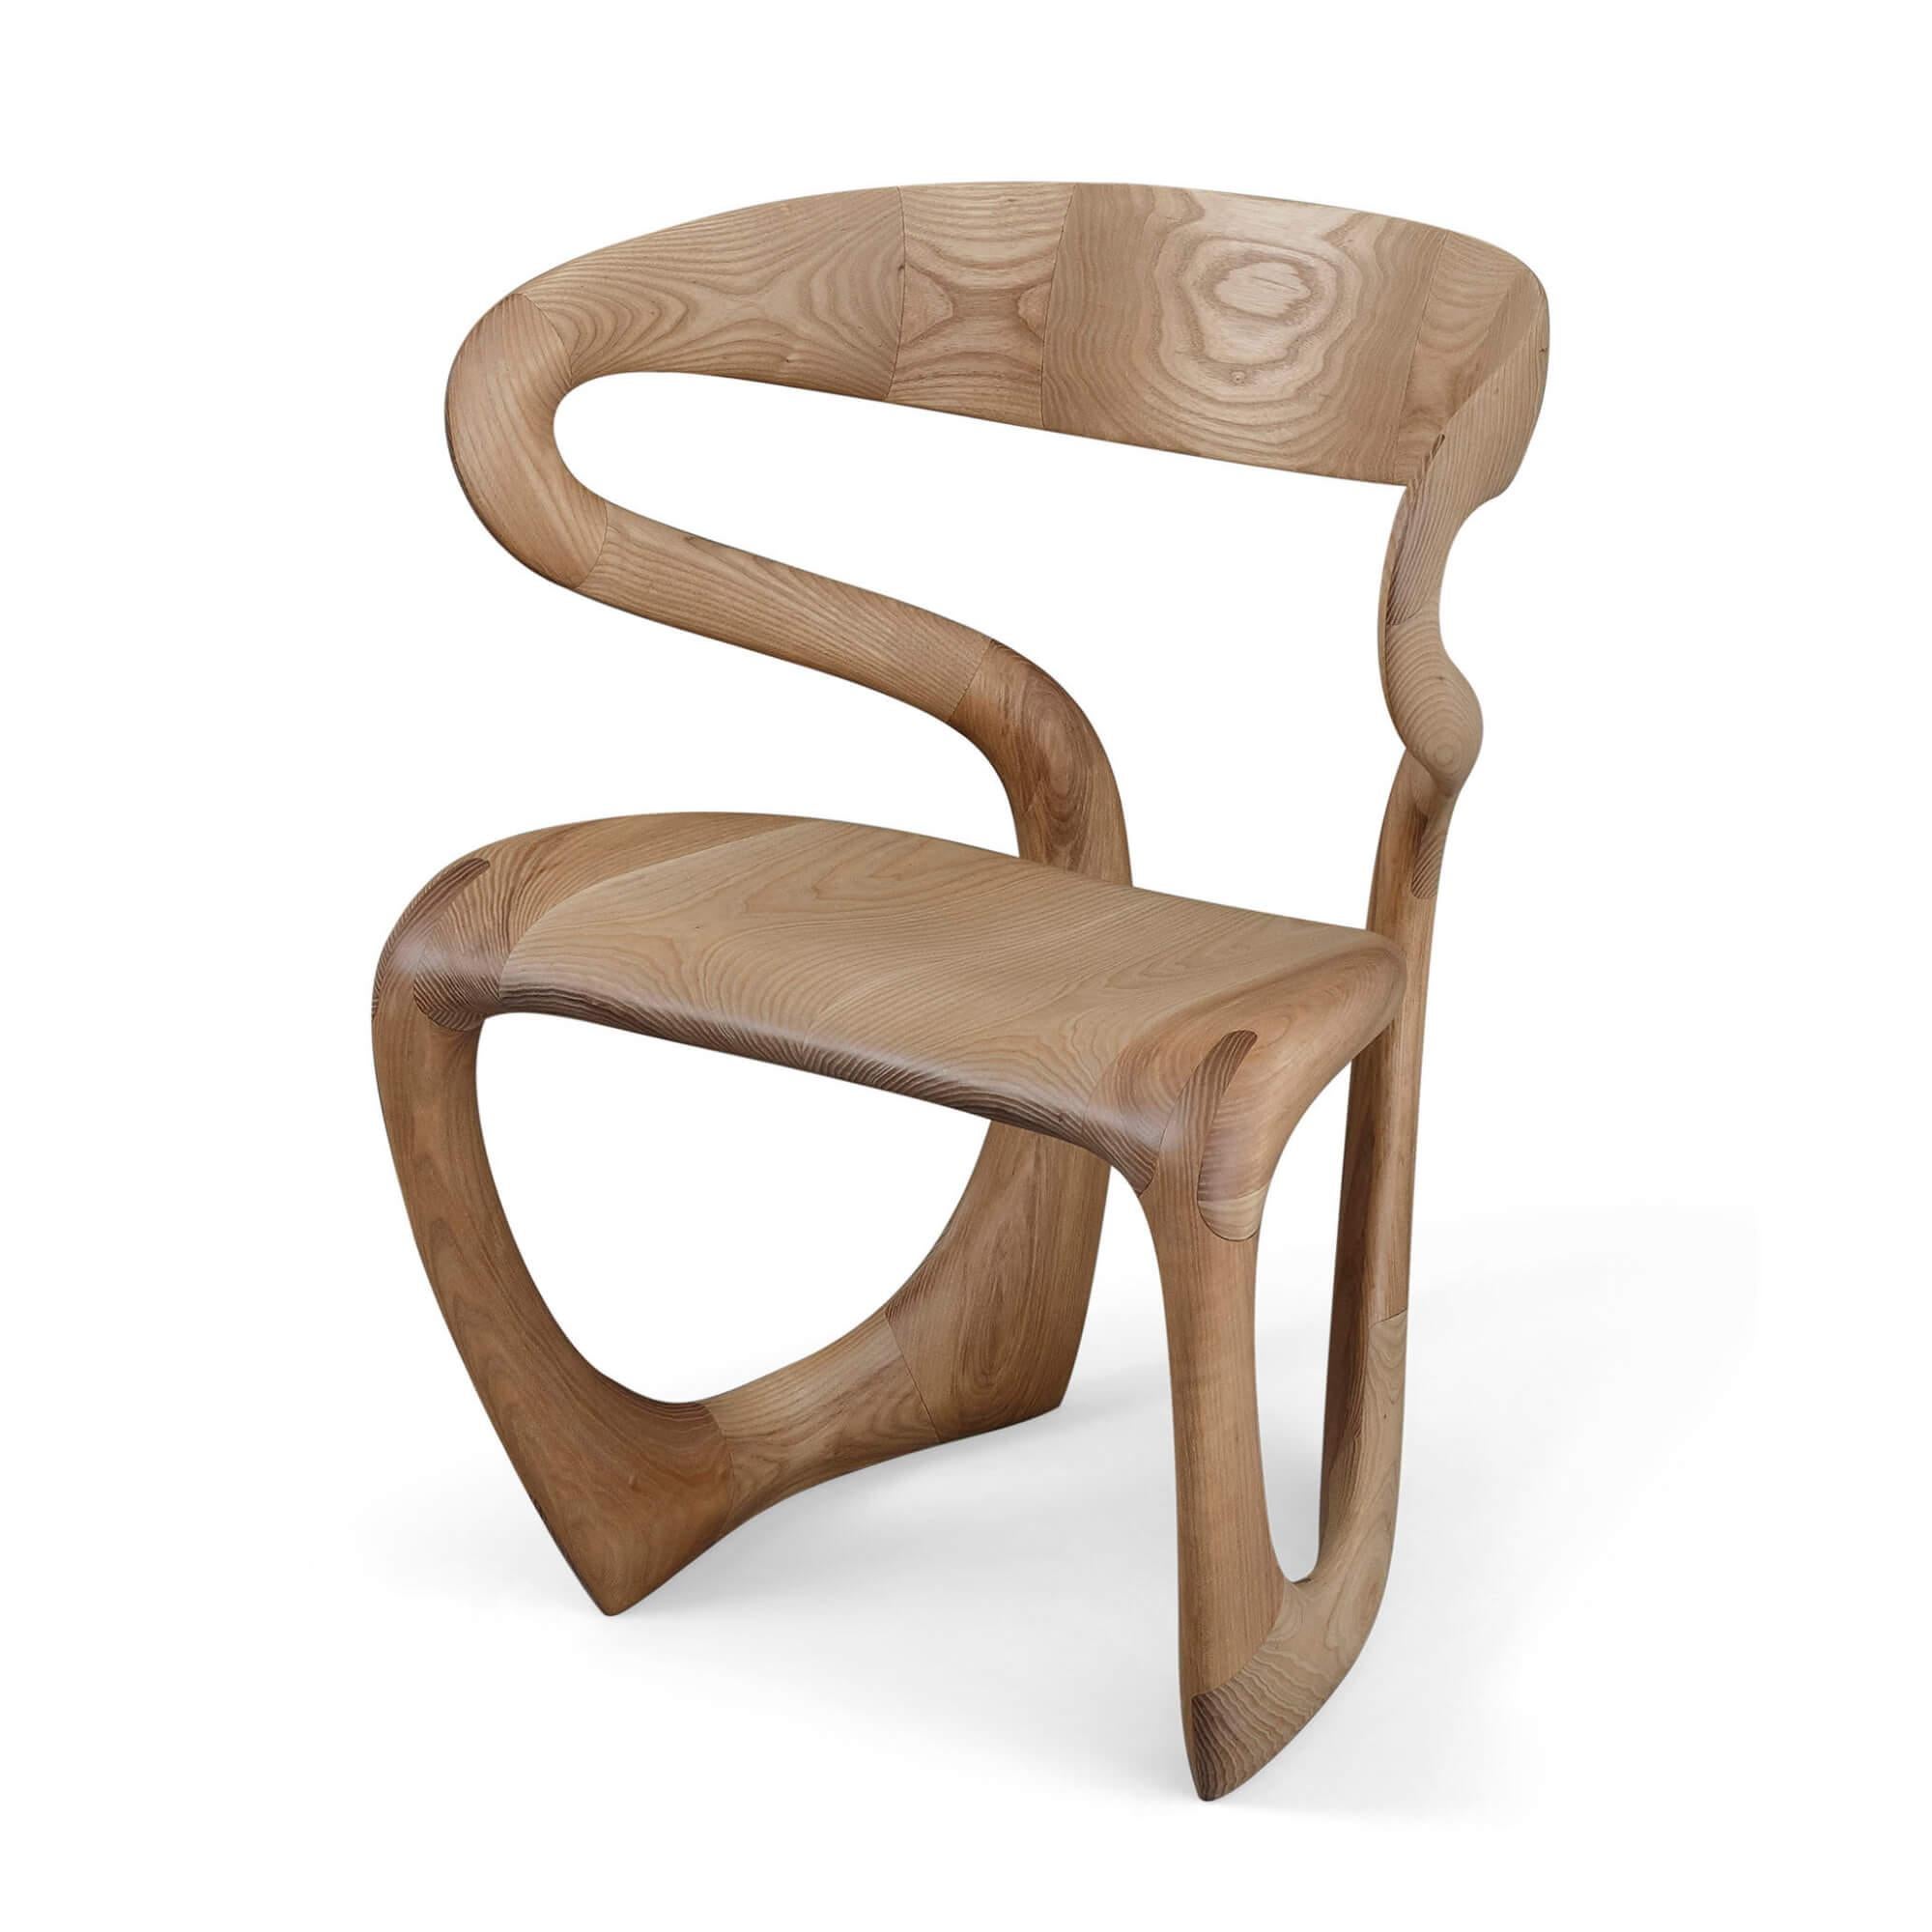 'S Chair', Contemporary Abstract Wooden Chair by Tom Vaughan In Excellent Condition For Sale In London, GB